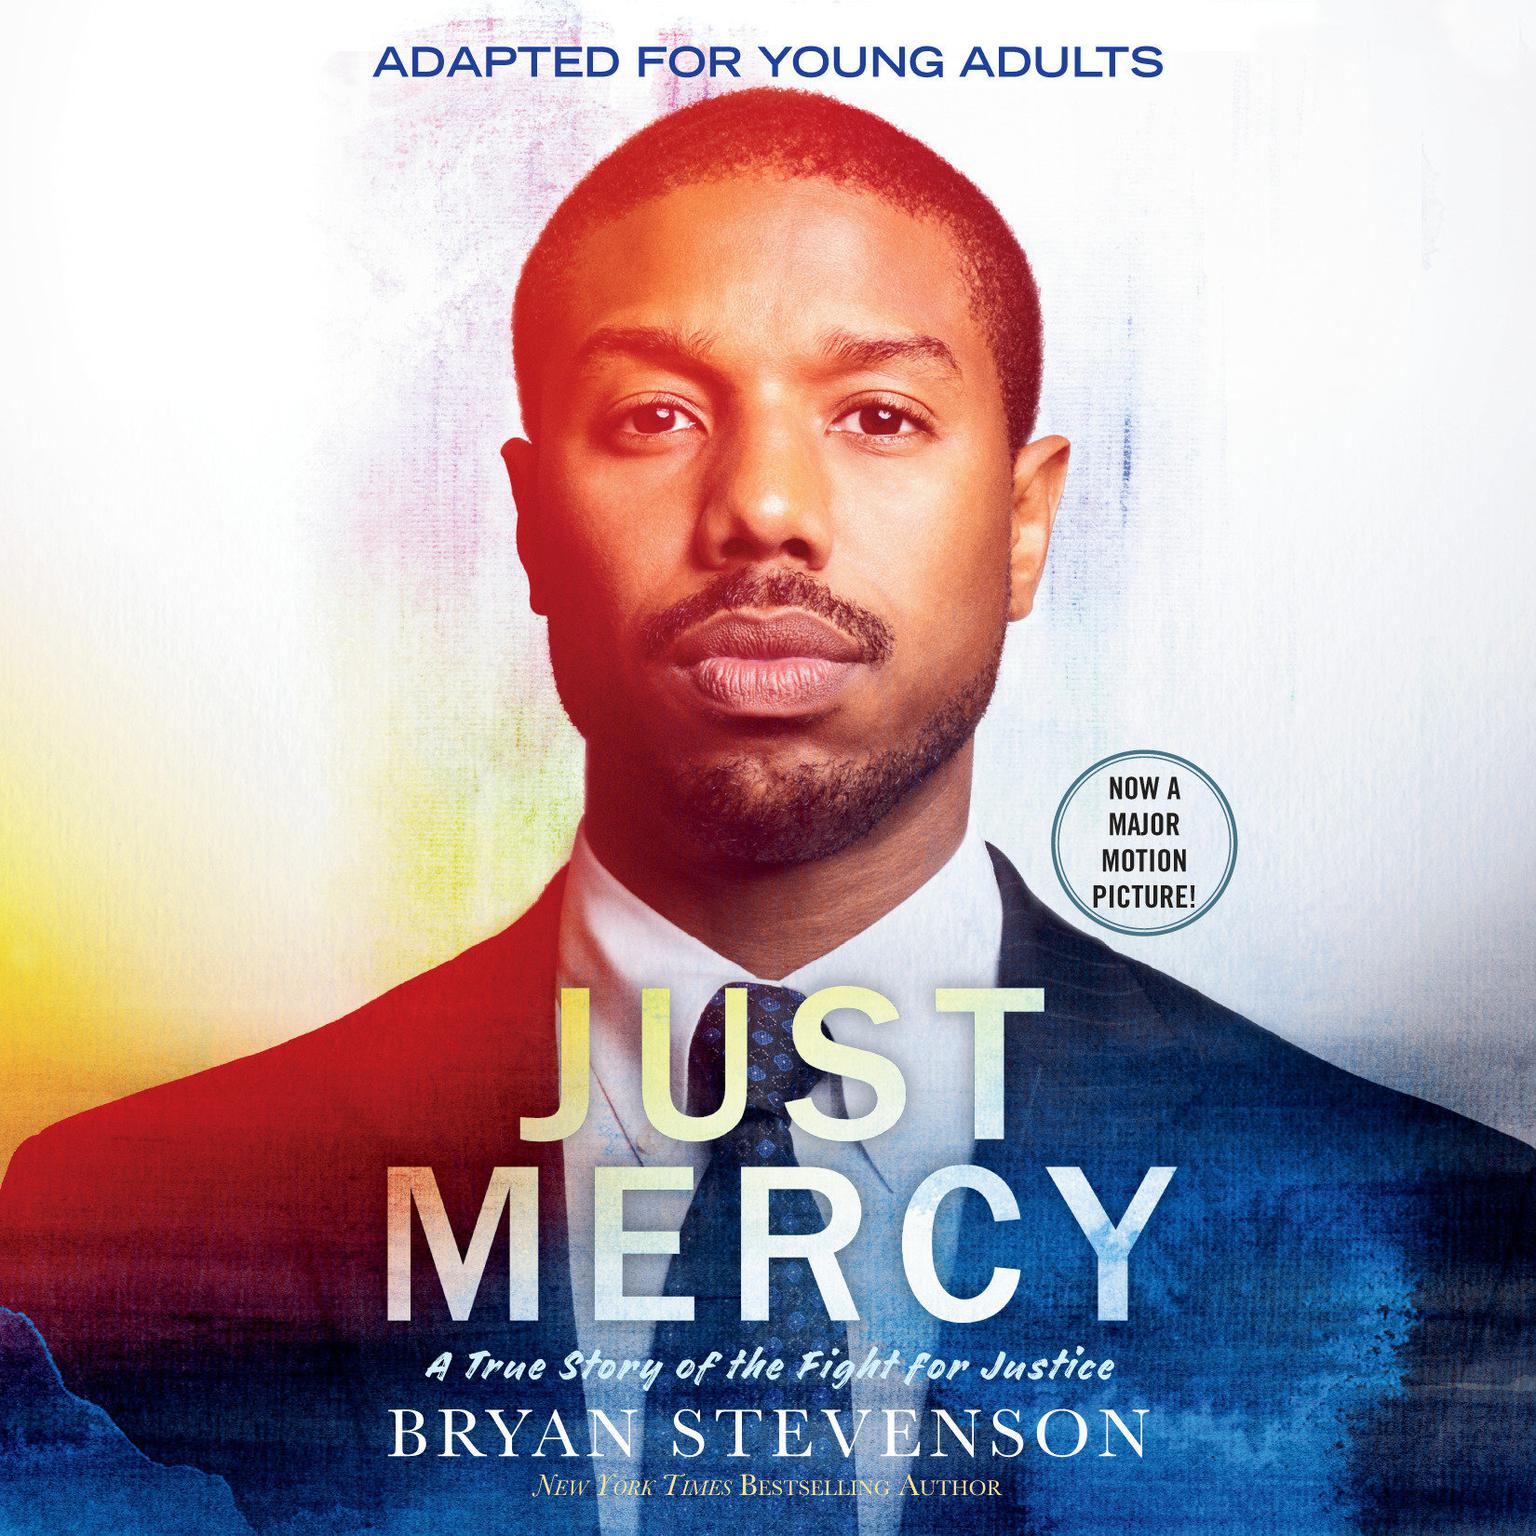 Just Mercy (Adapted for Young Adults): A True Story of the Fight for Justice Audiobook, by Bryan Stevenson